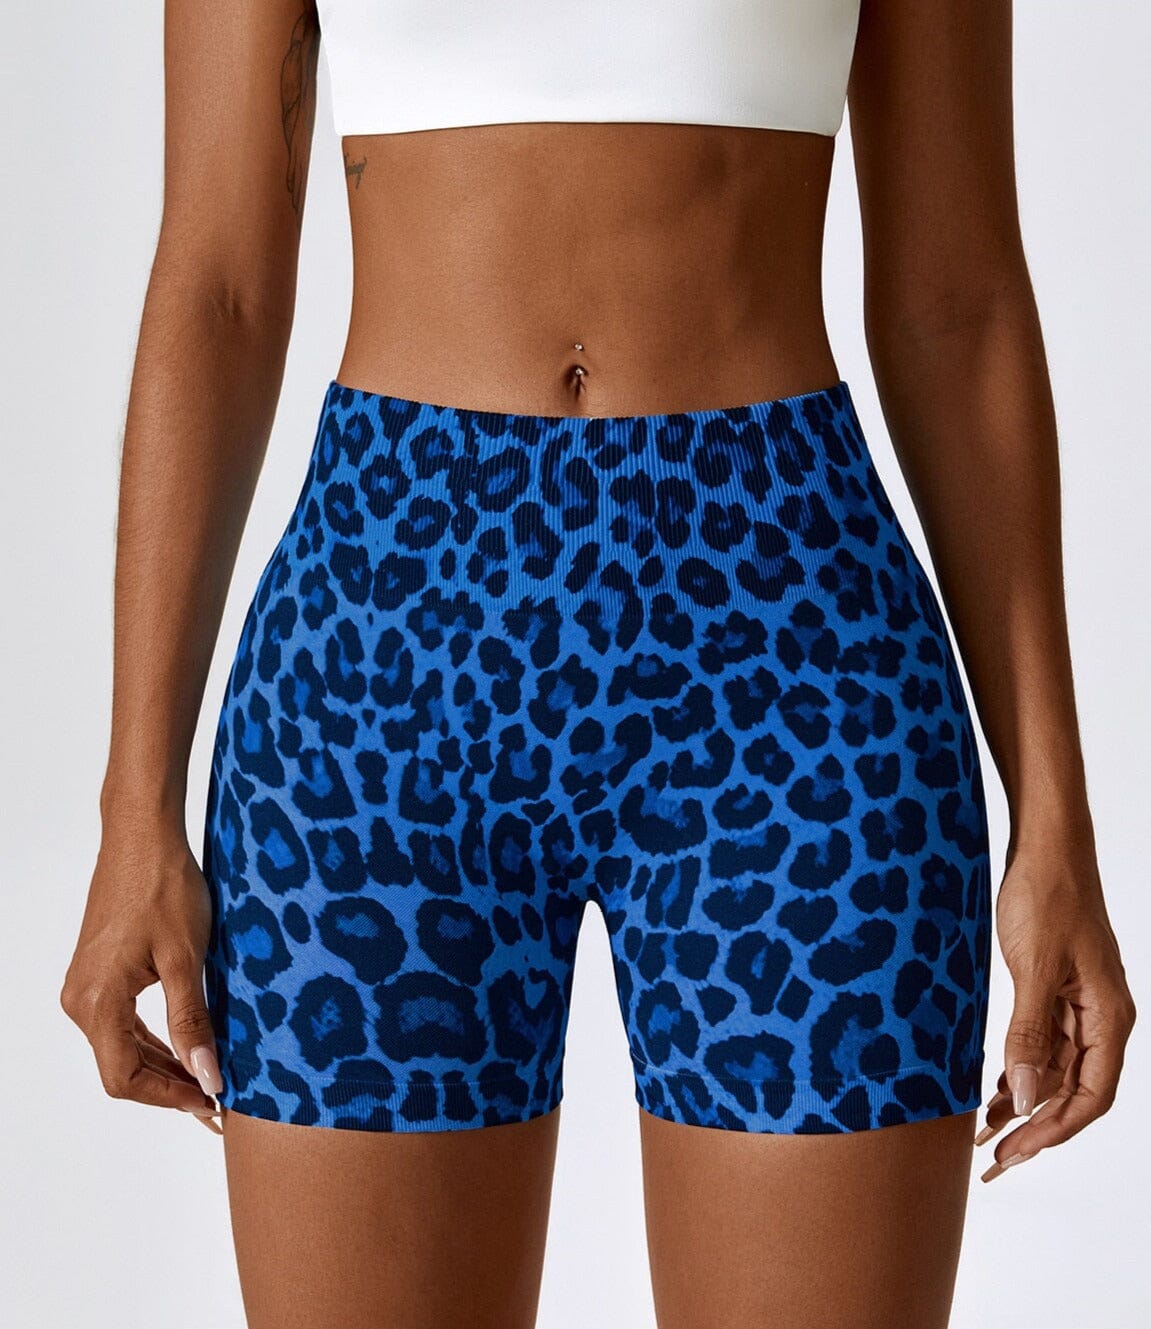 Ease Printed Seamless Shorts Shorts Starlethics Leopard Blue S 